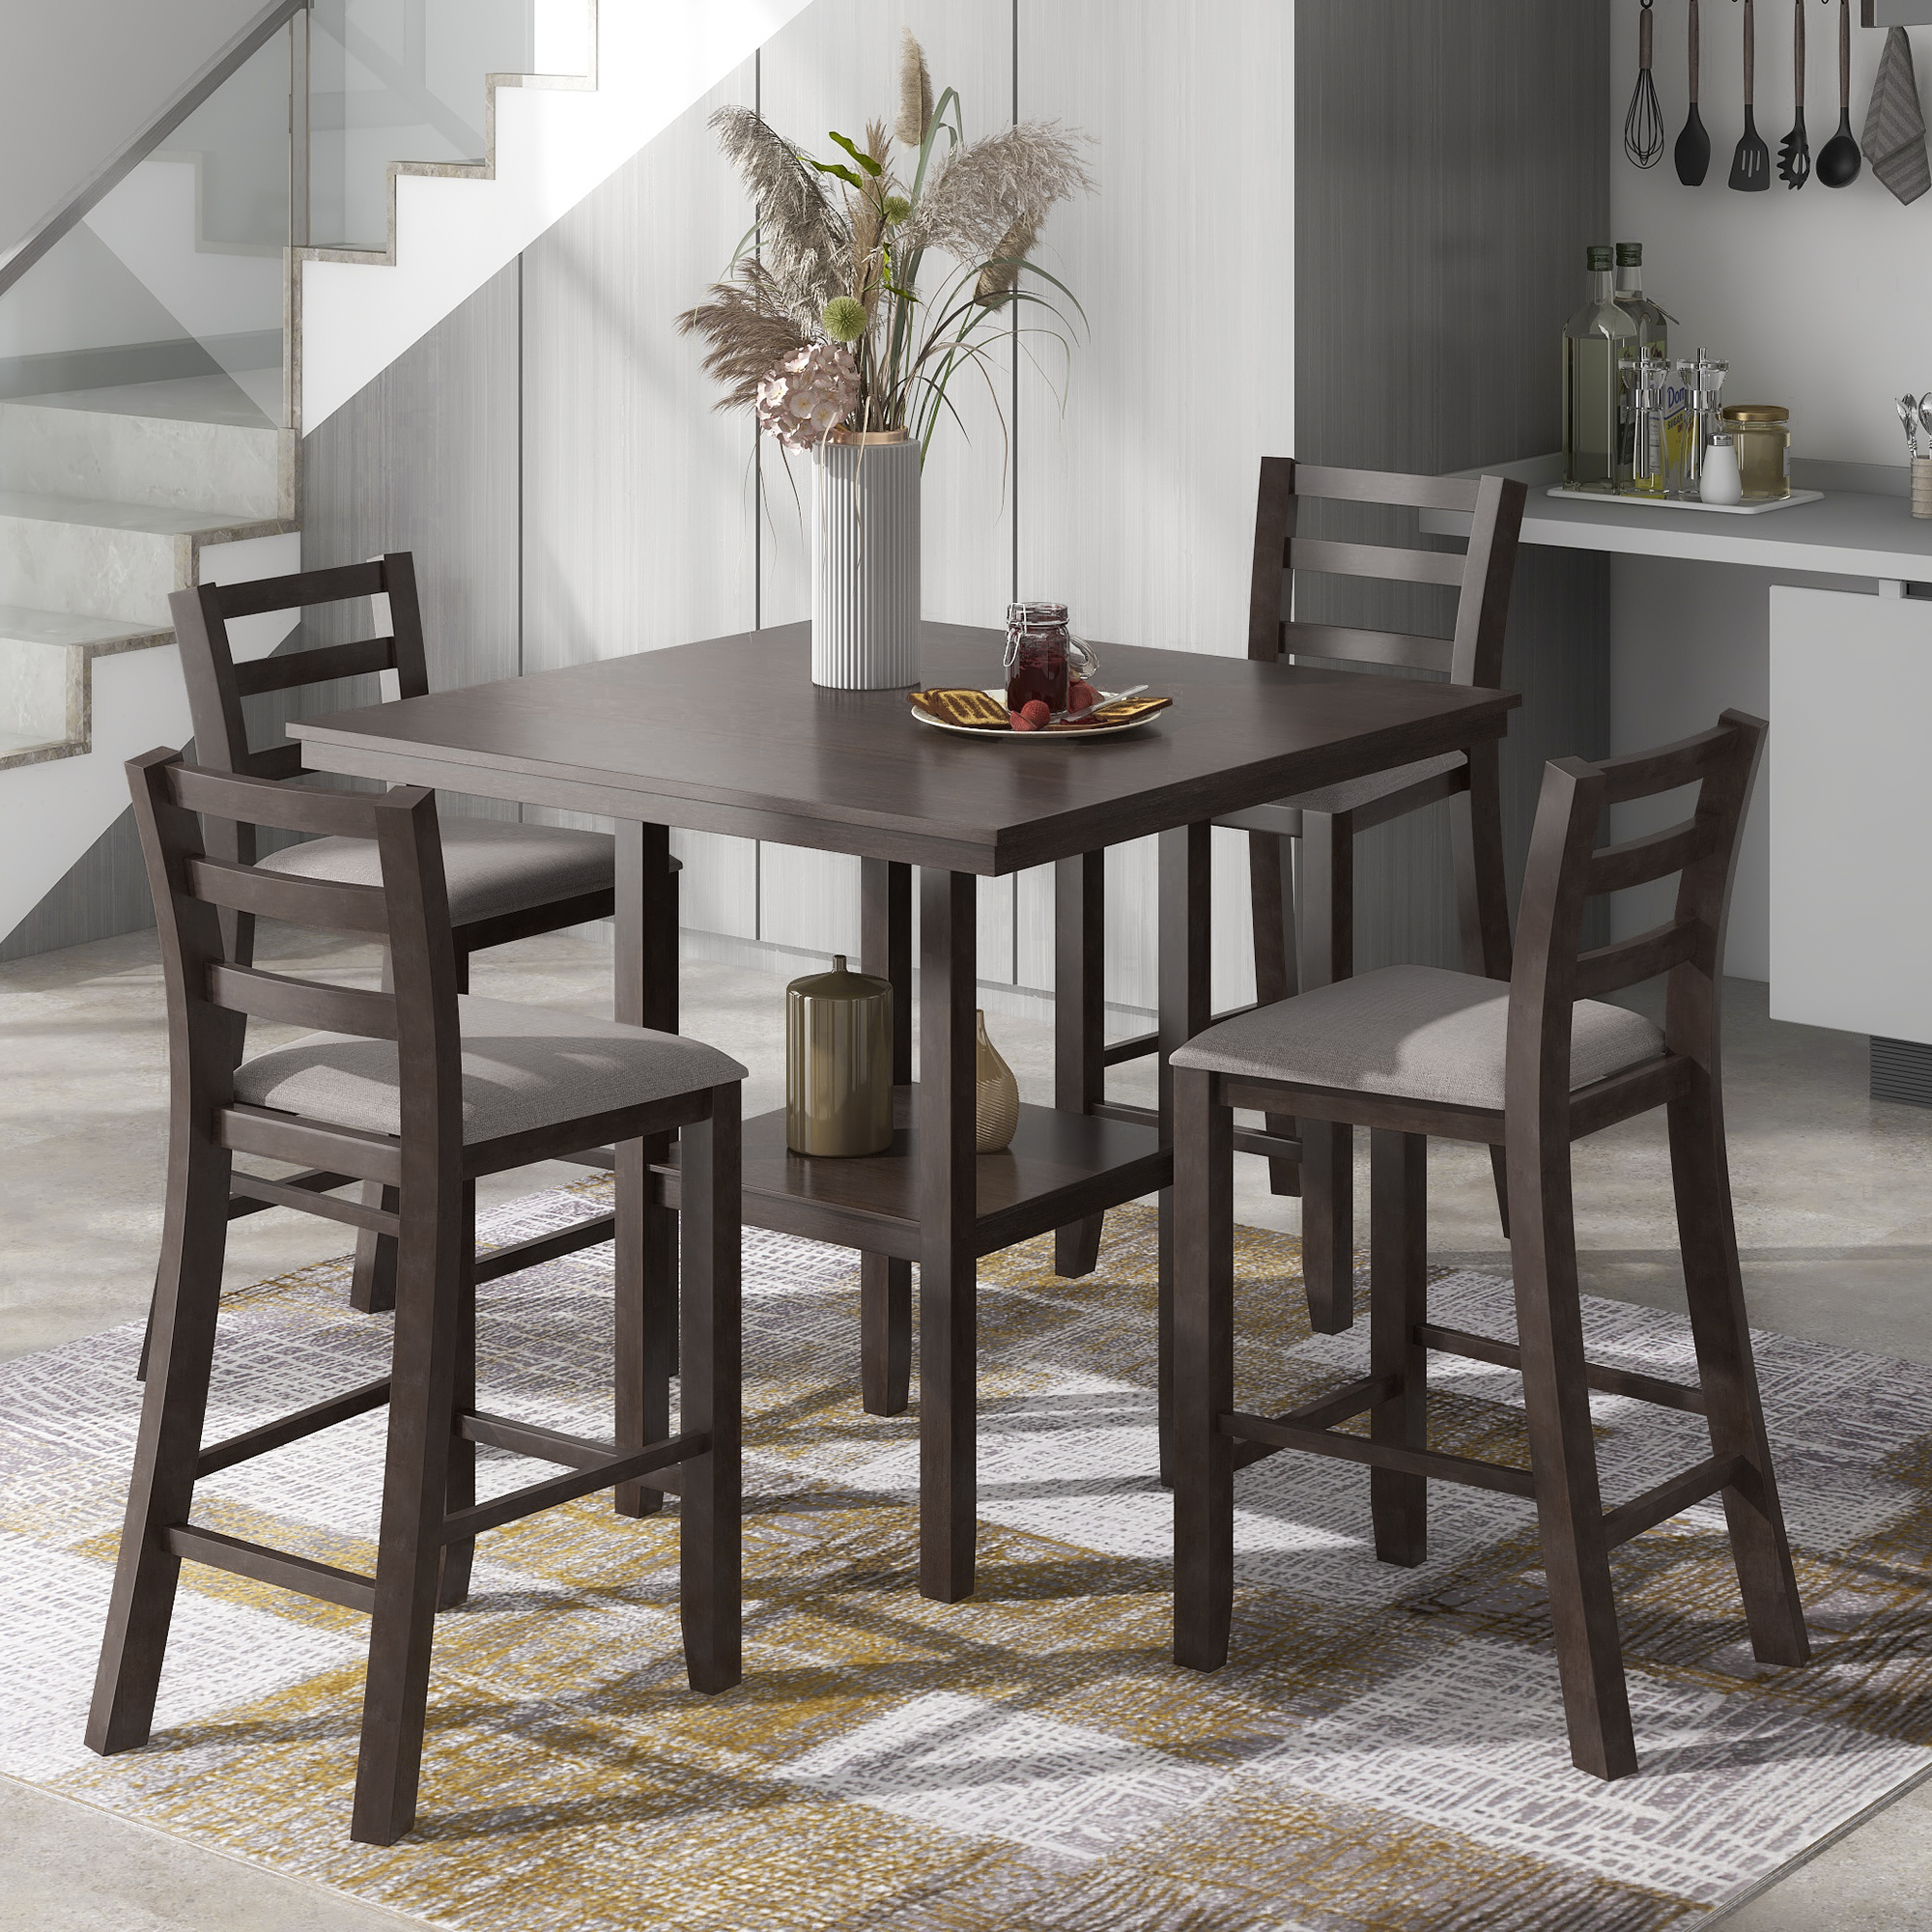 TREXM 5-Piece Wooden Counter Height Dining Set - ST000033AAP